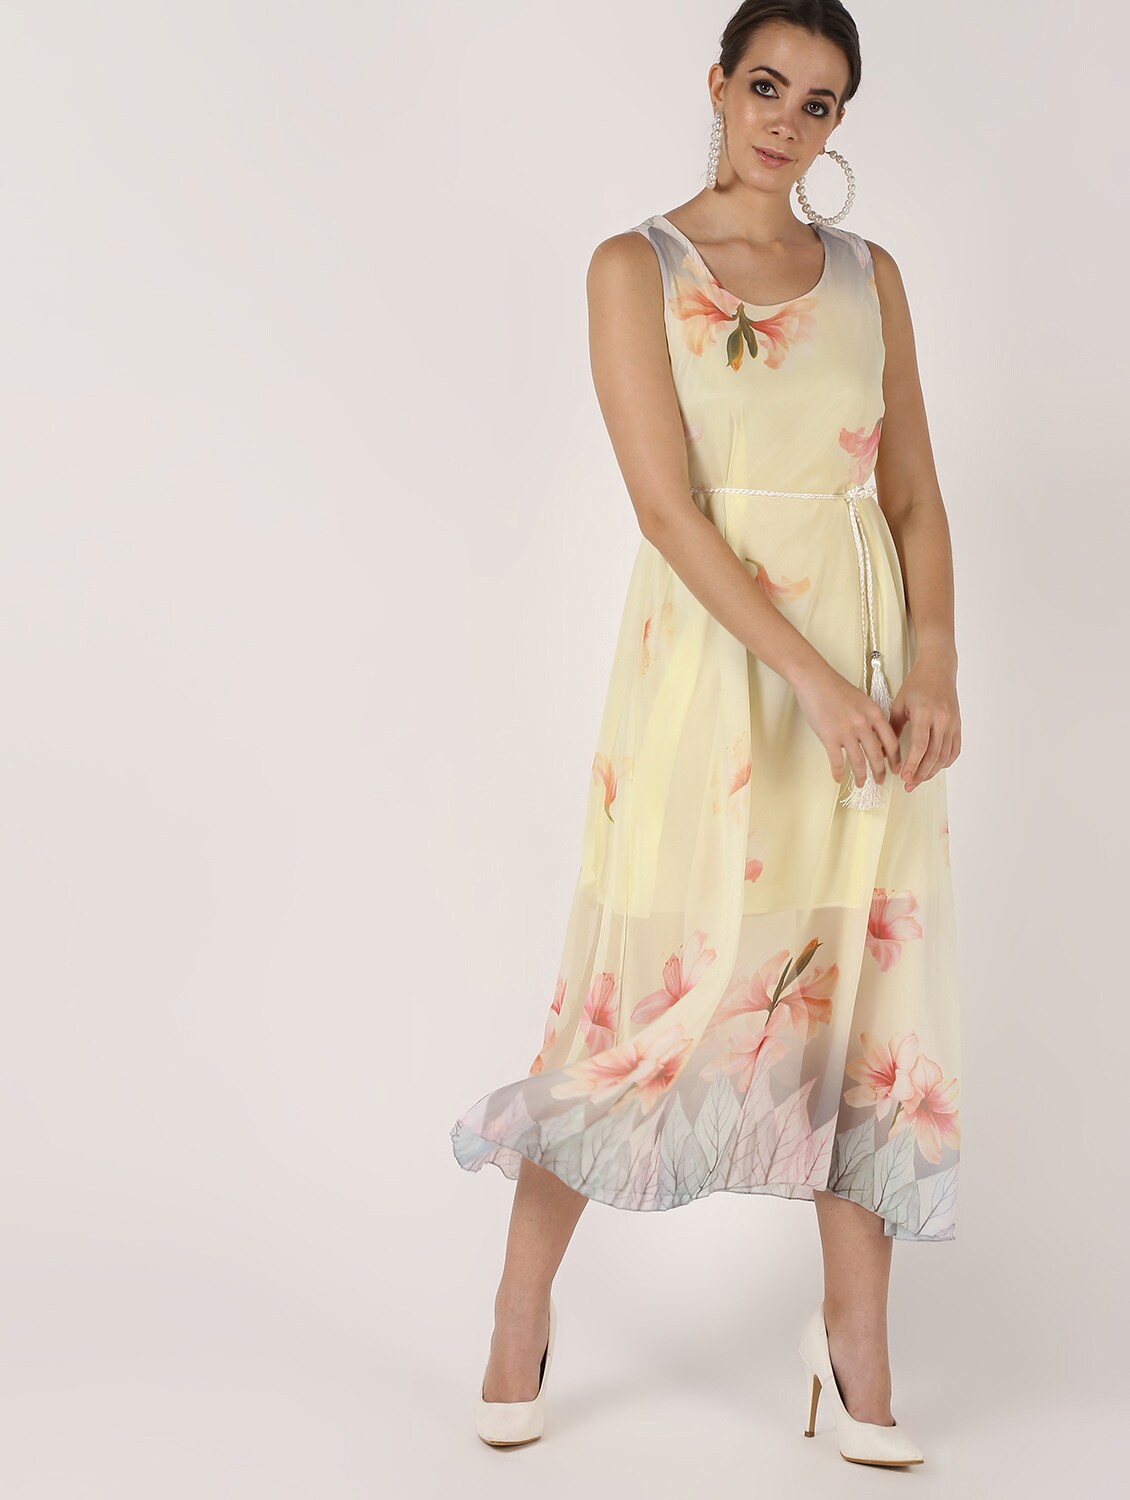 Lemon Color Quirky Style Tunic Summer Dress With Detachable Waist Belt - Coral Tree 